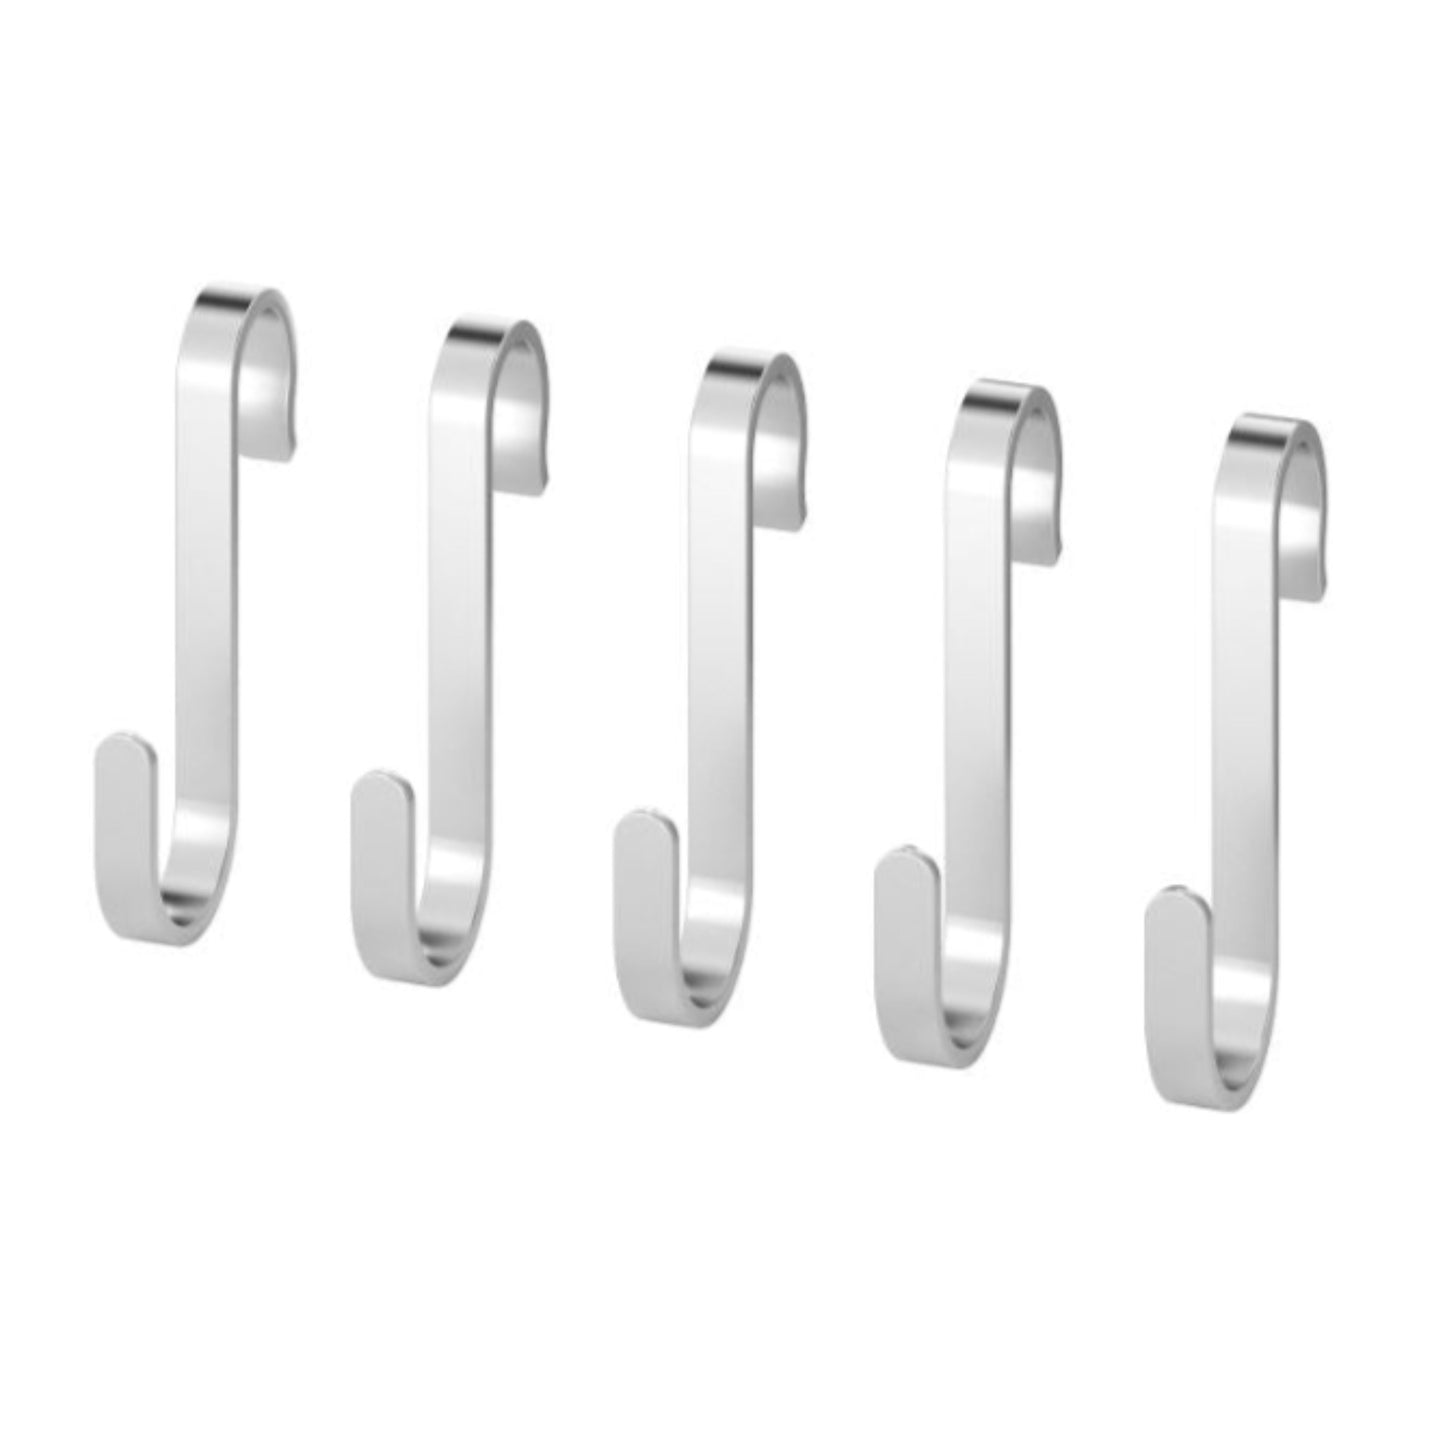 IKEA Kungsfors S/S S-Hook 5-Pack (1968548347969)